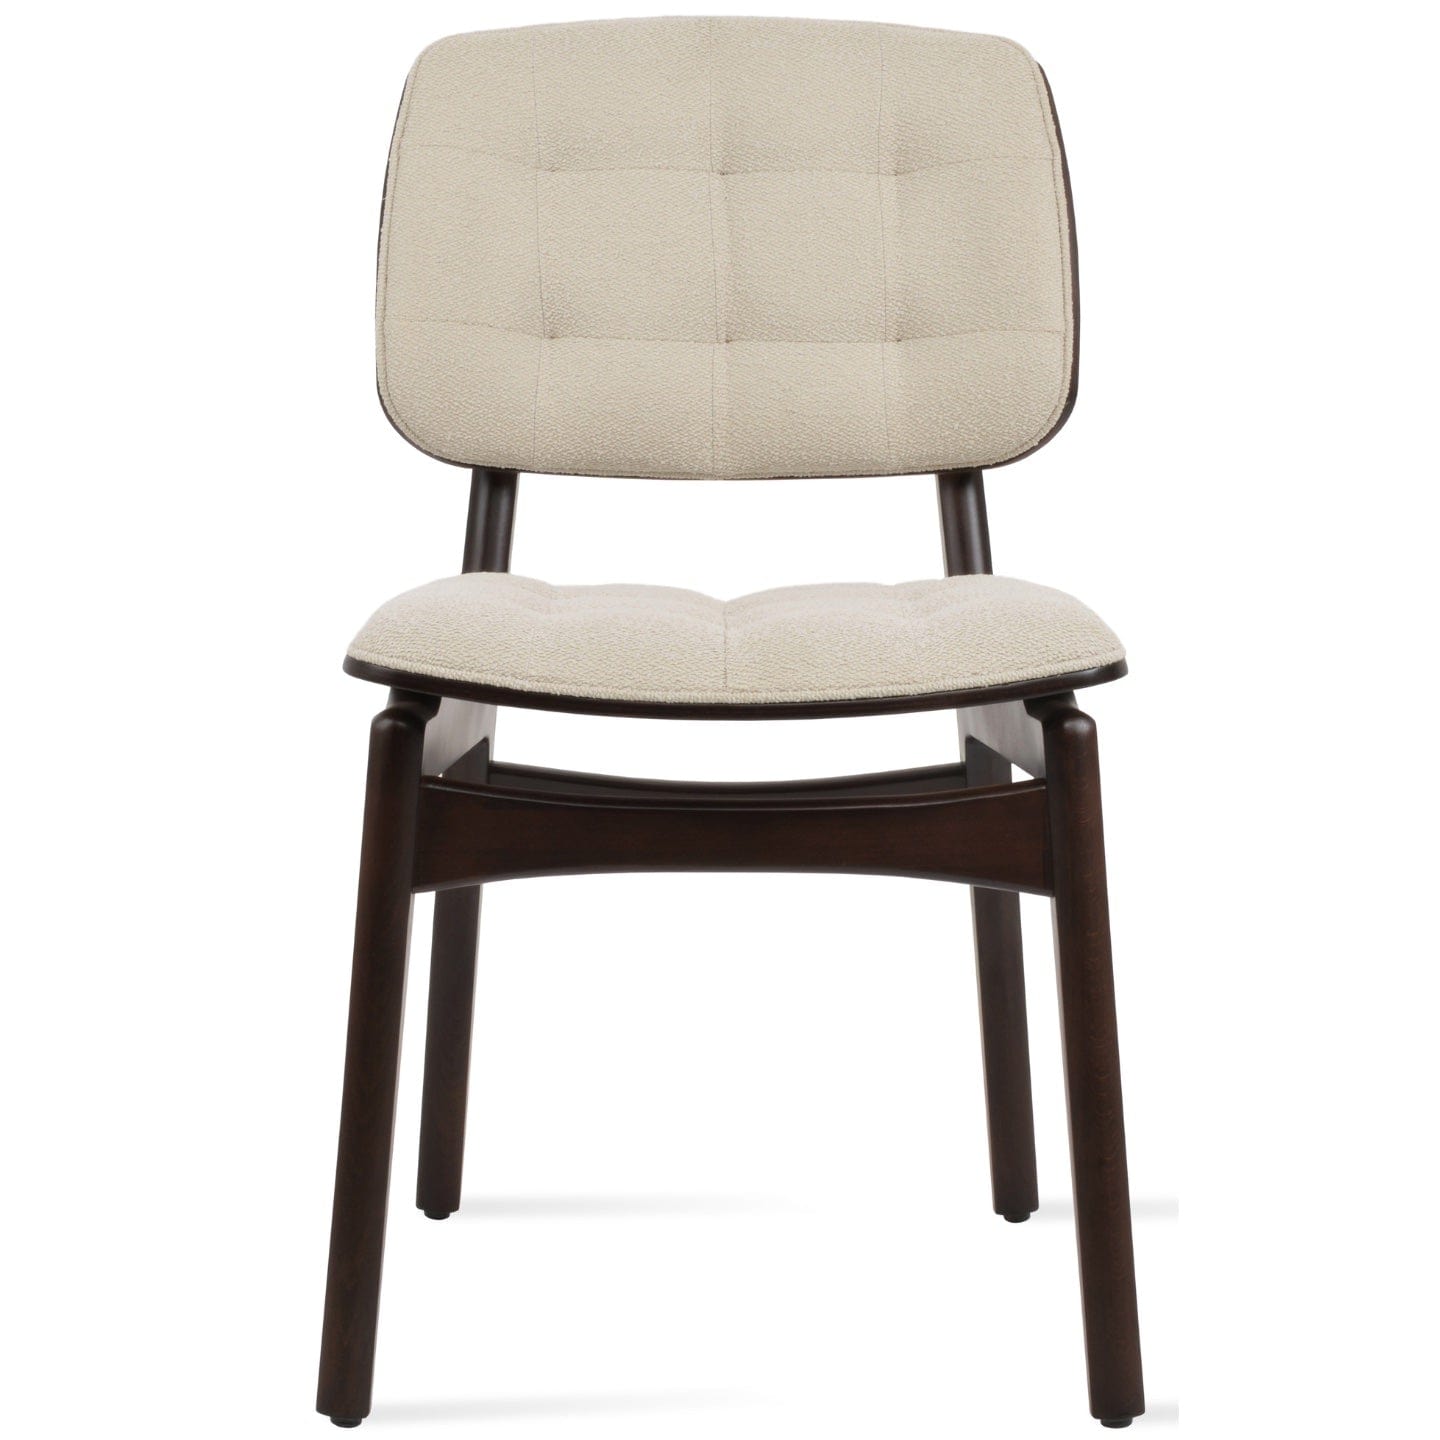 sohoConcept Kitchen & Dining Room Chairs Valencia Tufted Upholstered Chair | White Boucle Wood Dining Chair